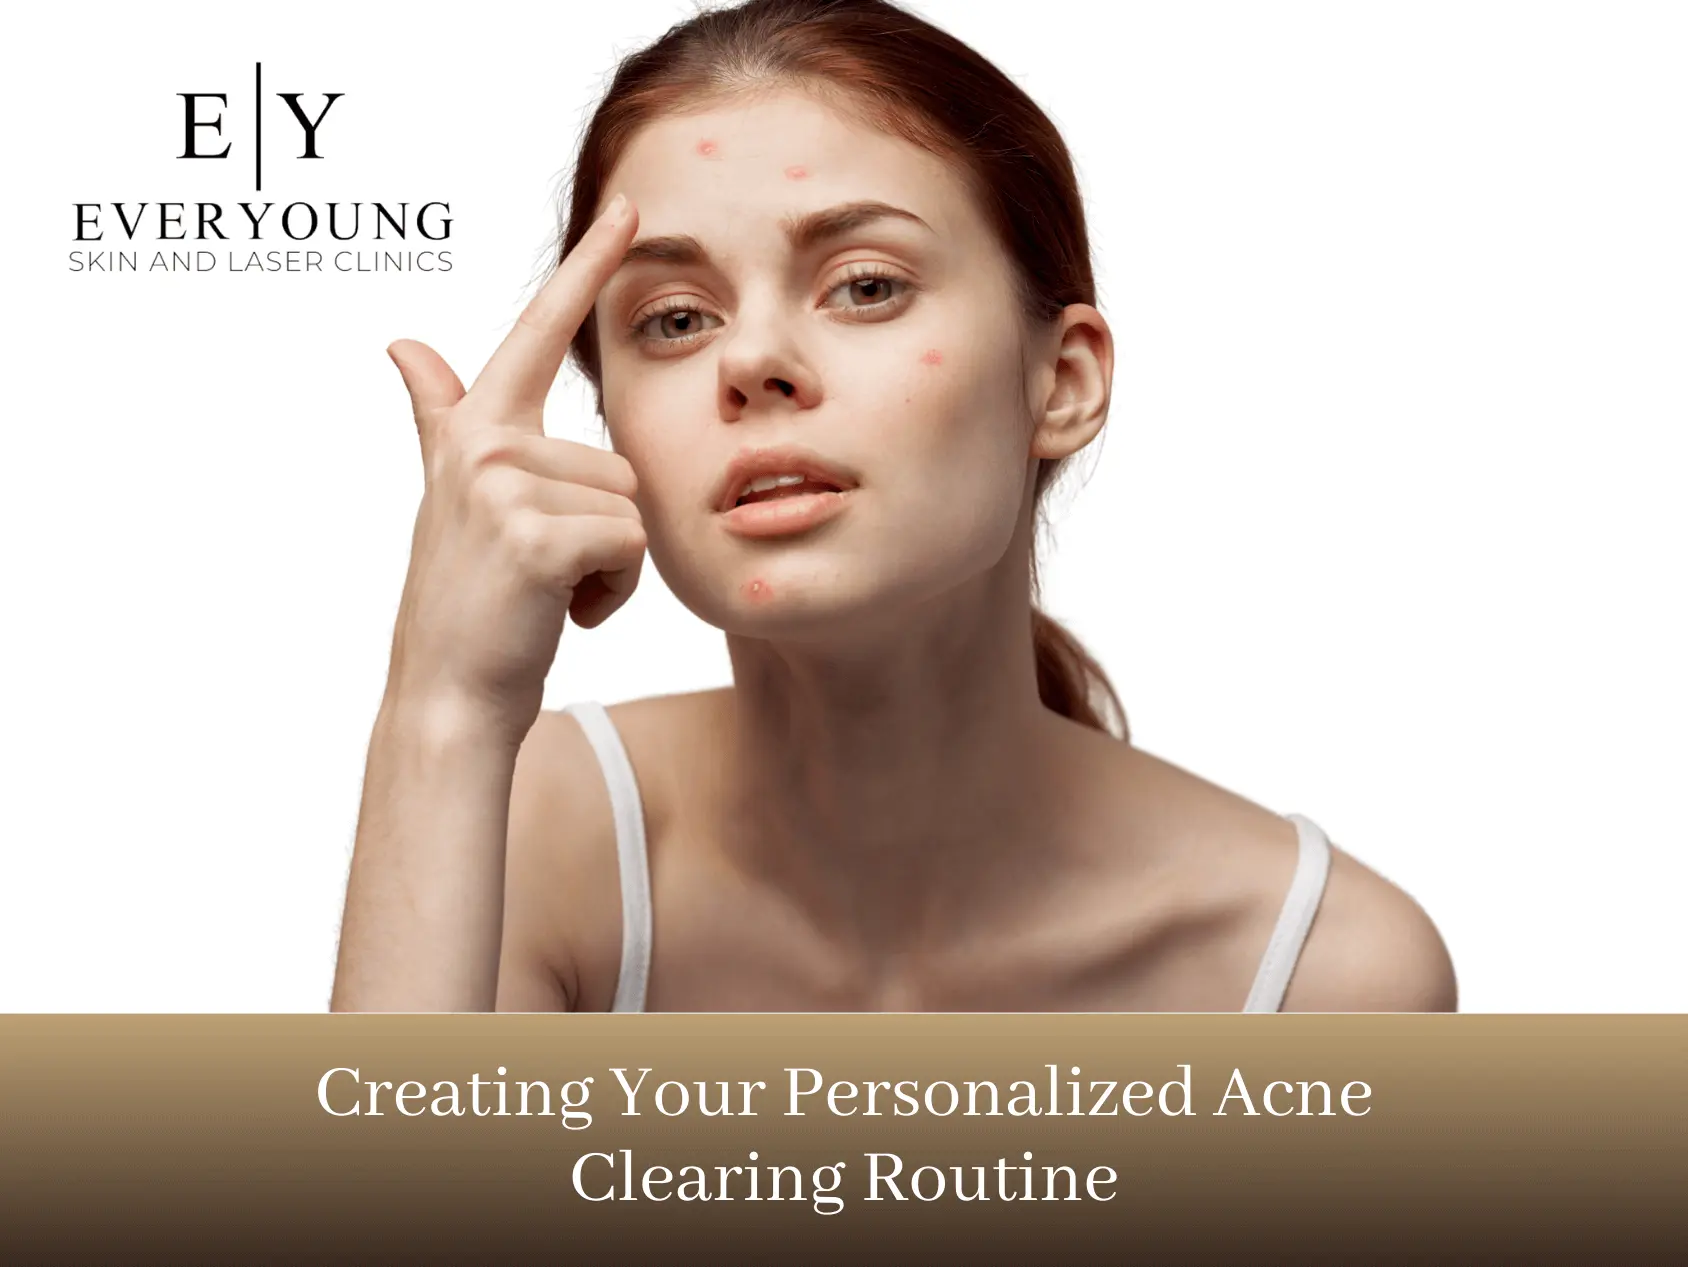 Creating your personalized acne clearing routine